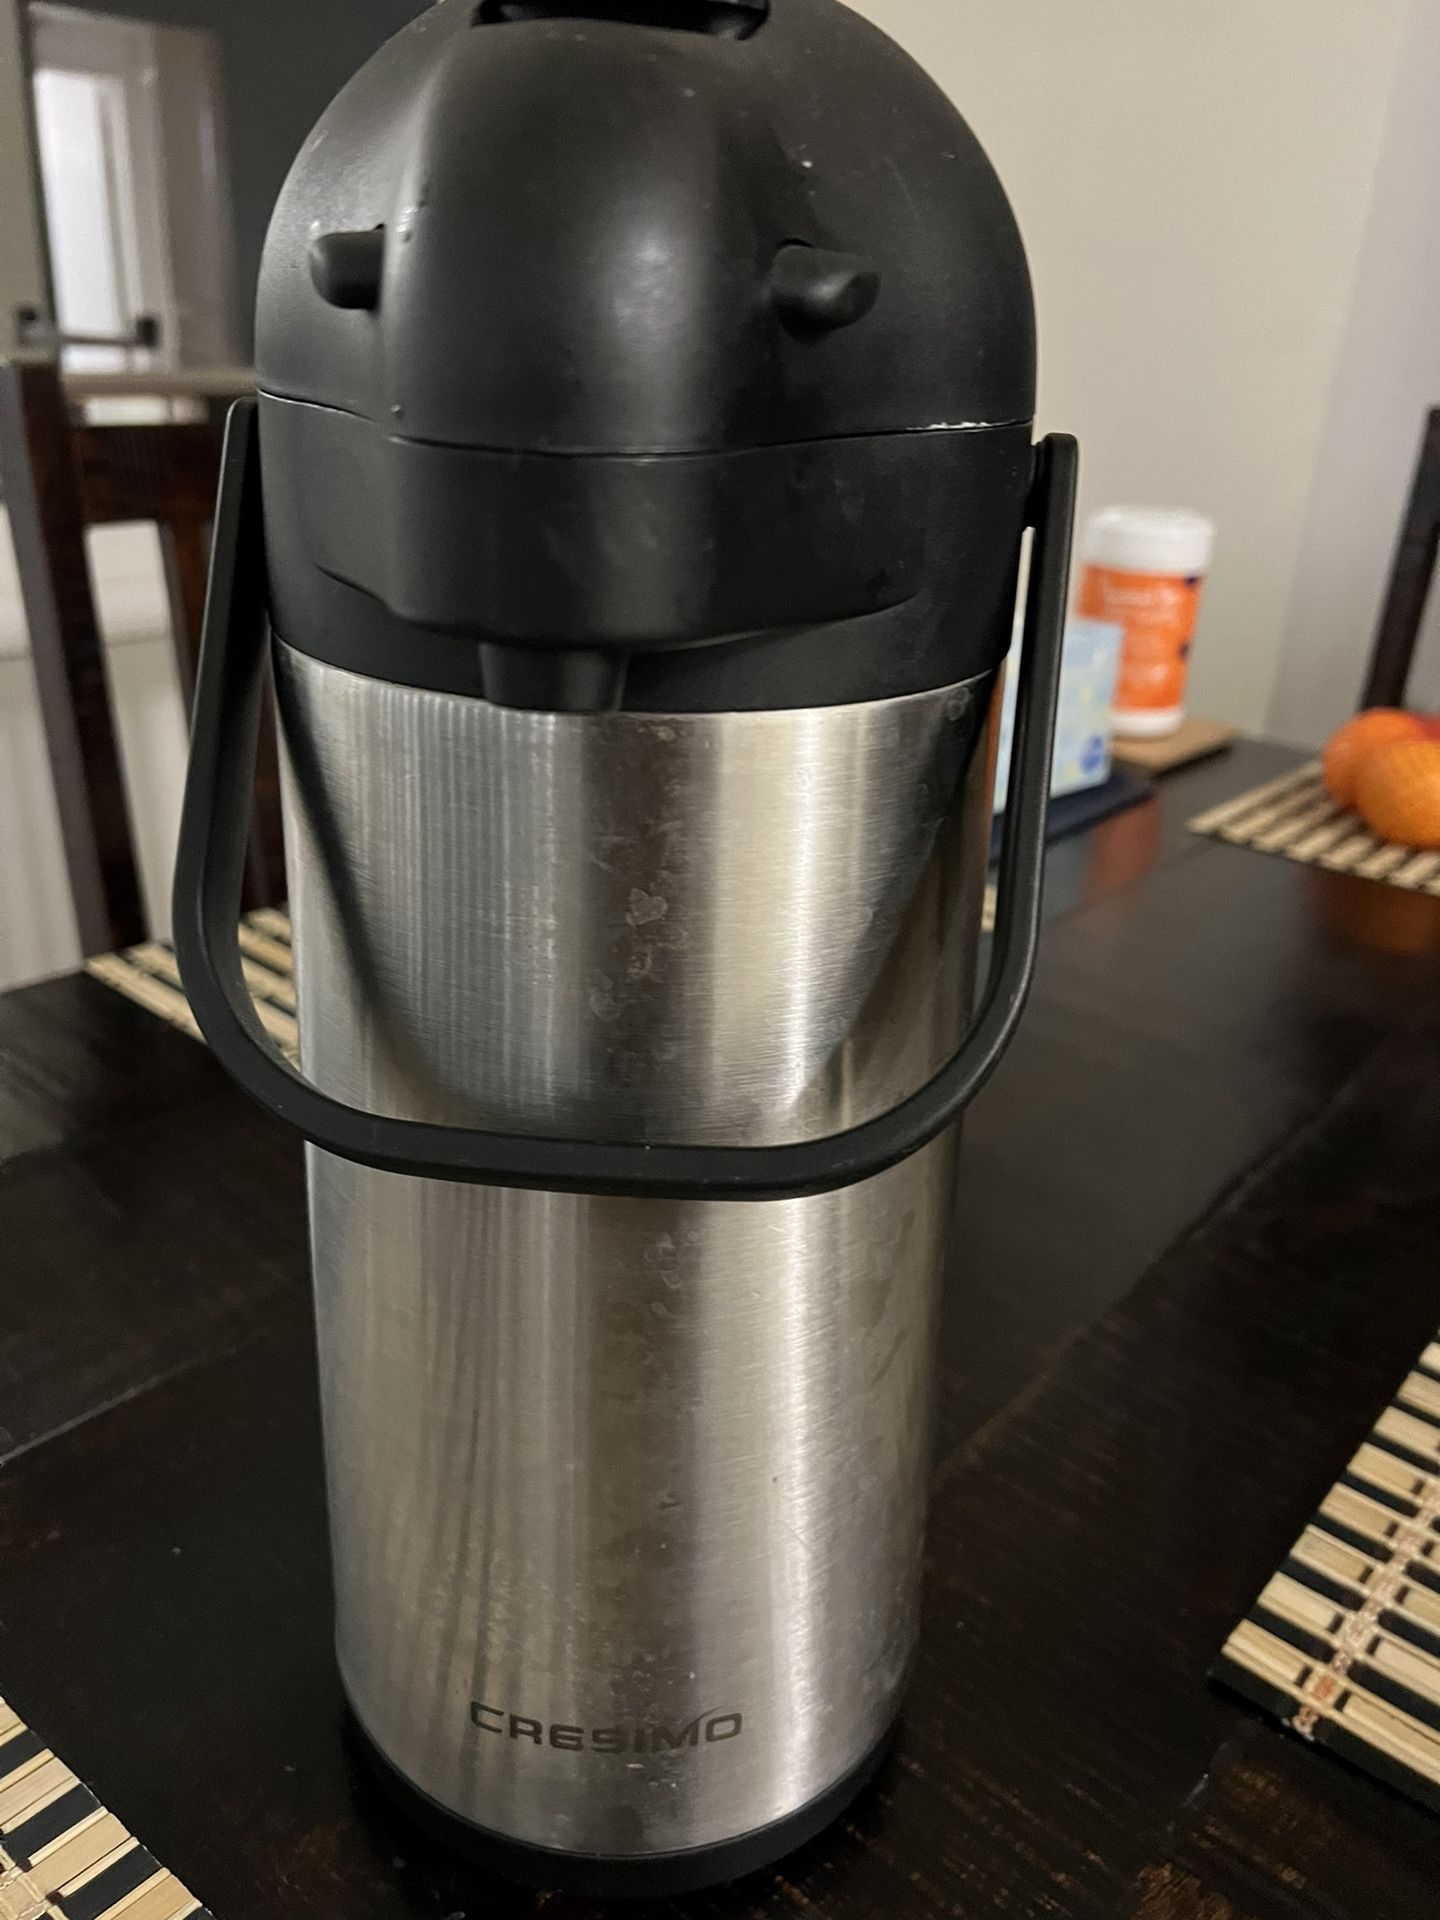 Cresimo Thermal Coffee & Tea Carafe for Sale in San Gabriel, CA - OfferUp